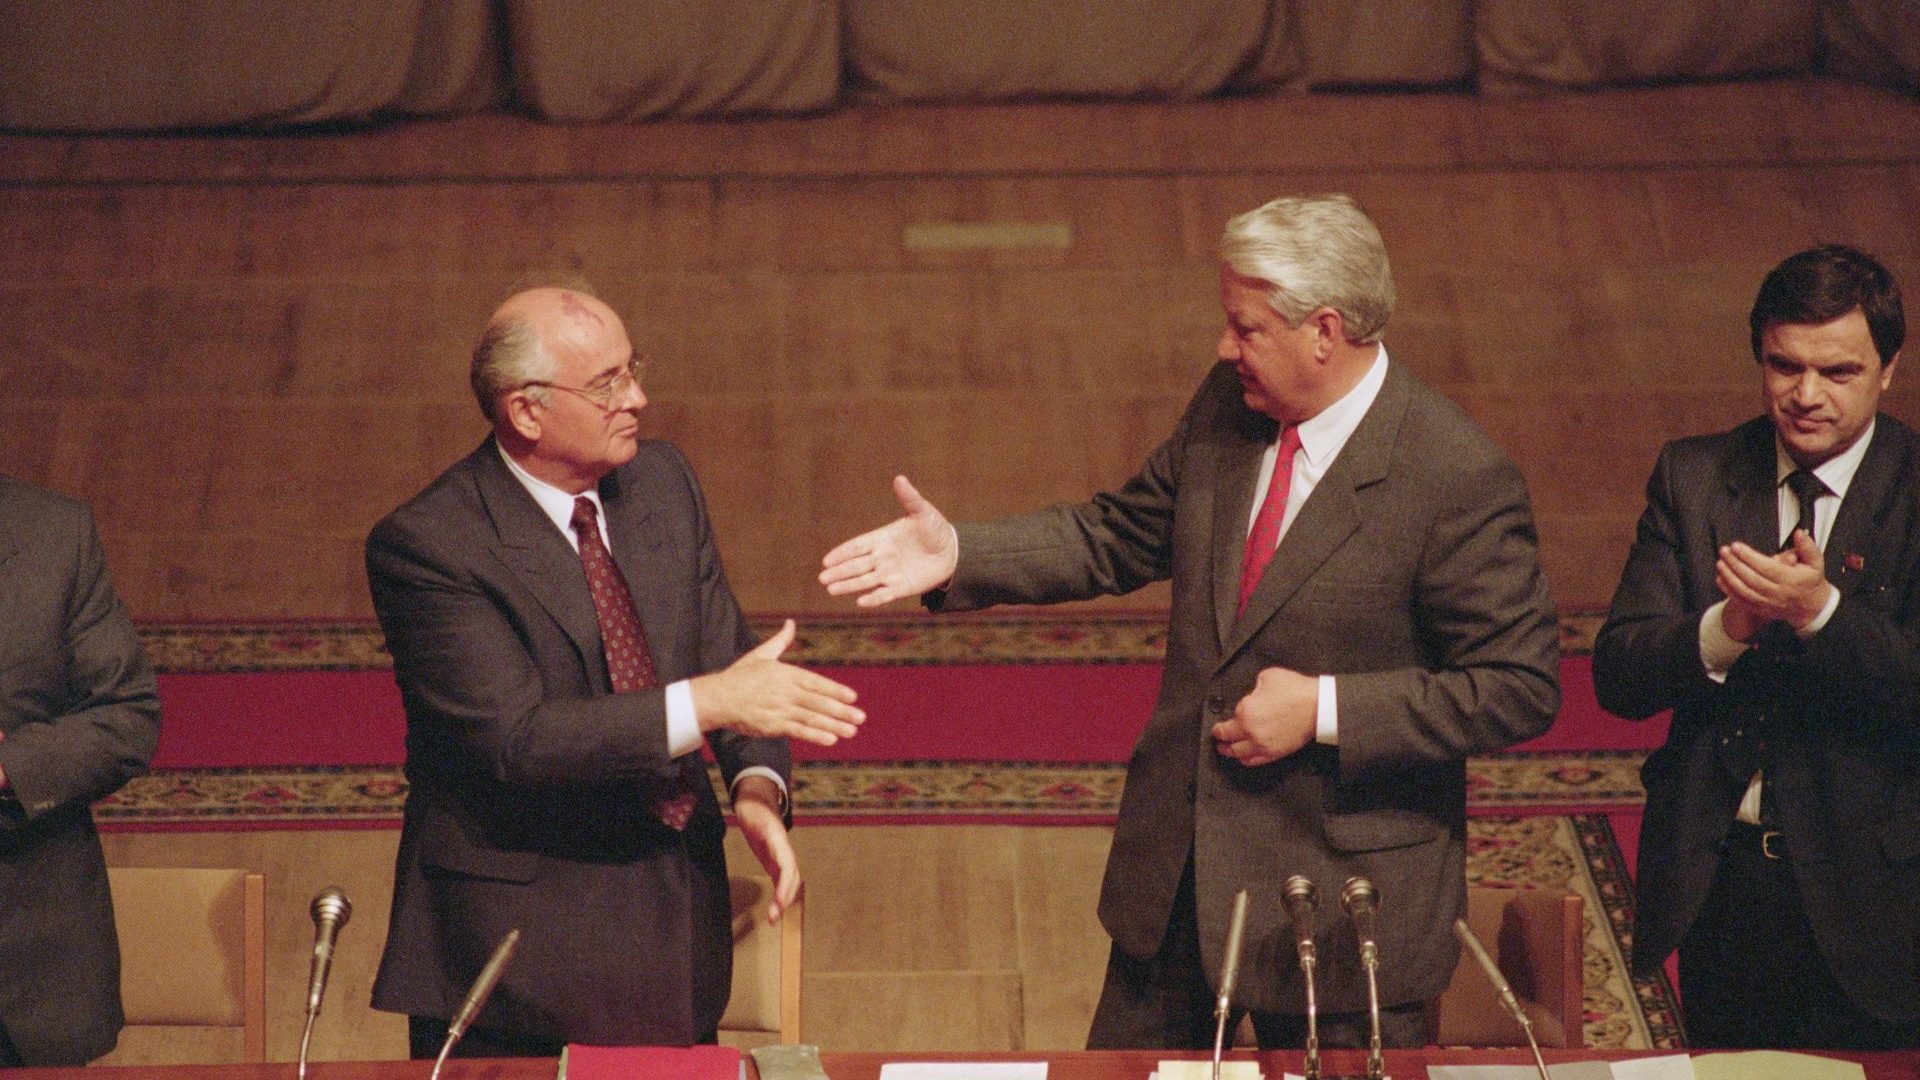 Soviet leader
Mikhail Gorbachev
and Boris Yeltsin
shake hands
during a meeting
after the failed
coup d’etat in 1999. Photo: Peter Turnley/
Corbis/VCG via Getty
Images